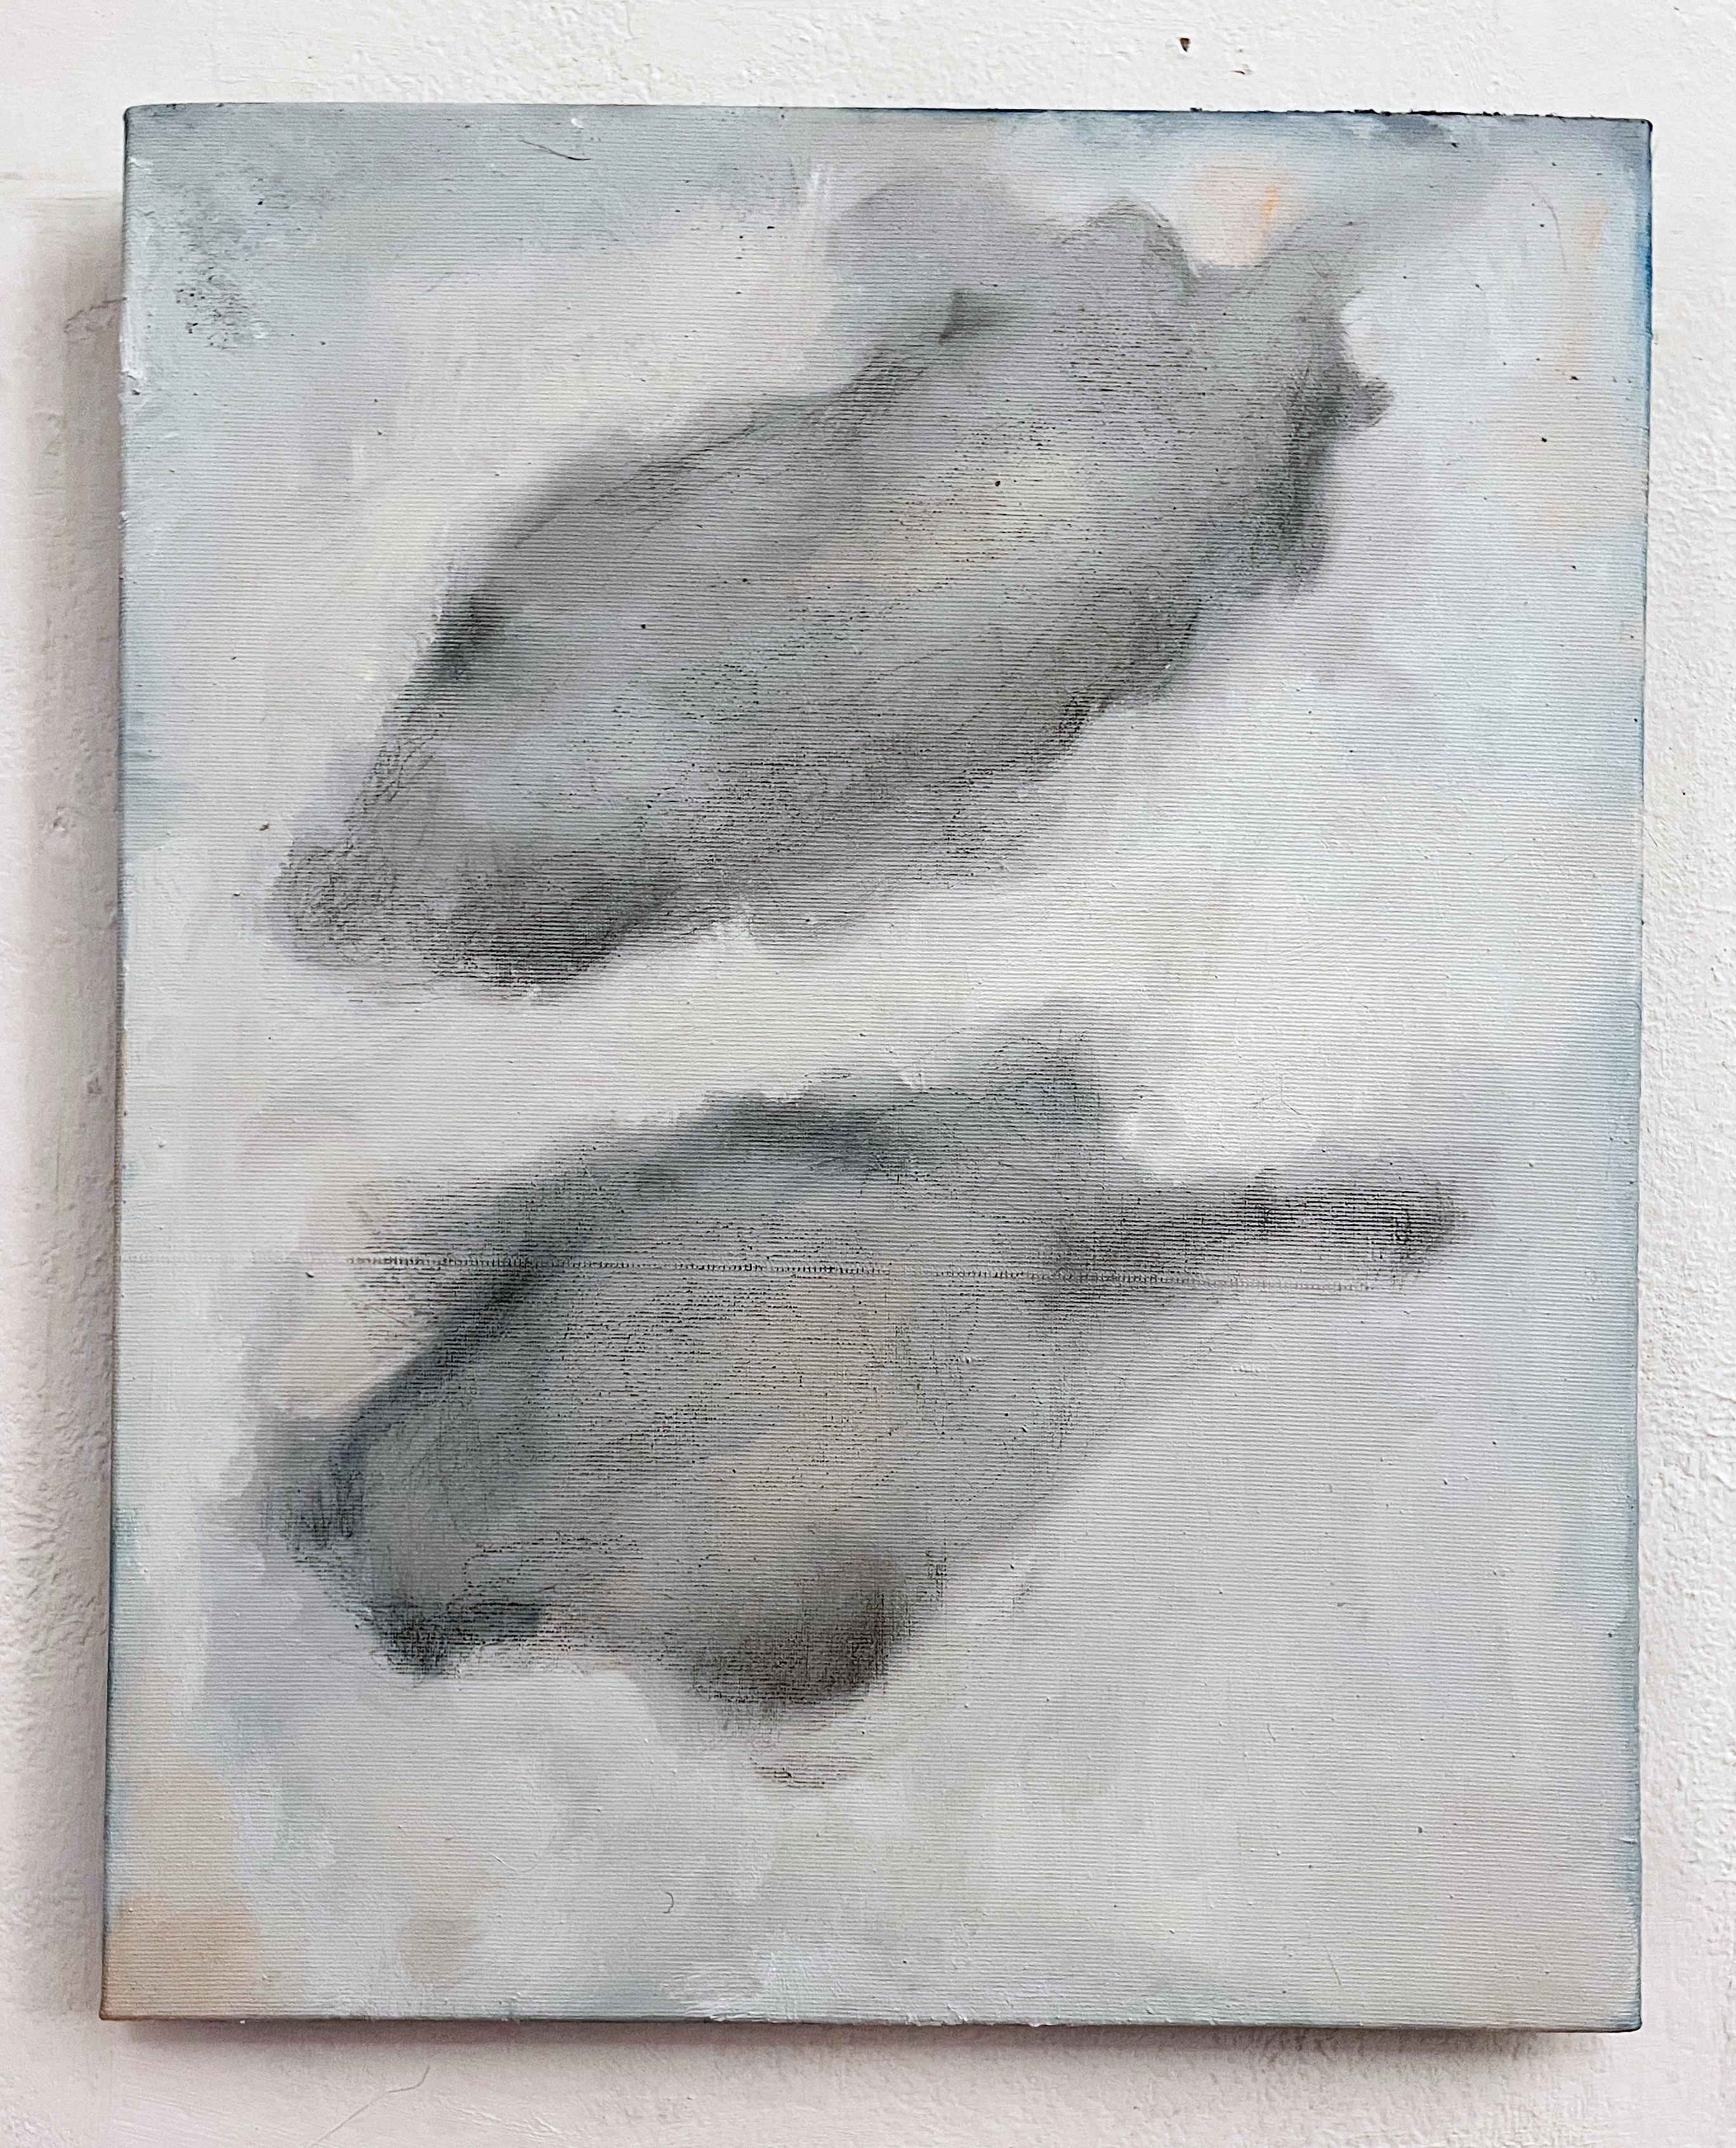 Clouds
oil on canvas 
50x40 cm

Original Oil paint on canvas
Ready to hang

Marilina Marchica, born in 1984, was born in Agrigento, where she lives and works. She graduated in Painting at the Academy of Fine Arts in Bologna and at the Polytechnic